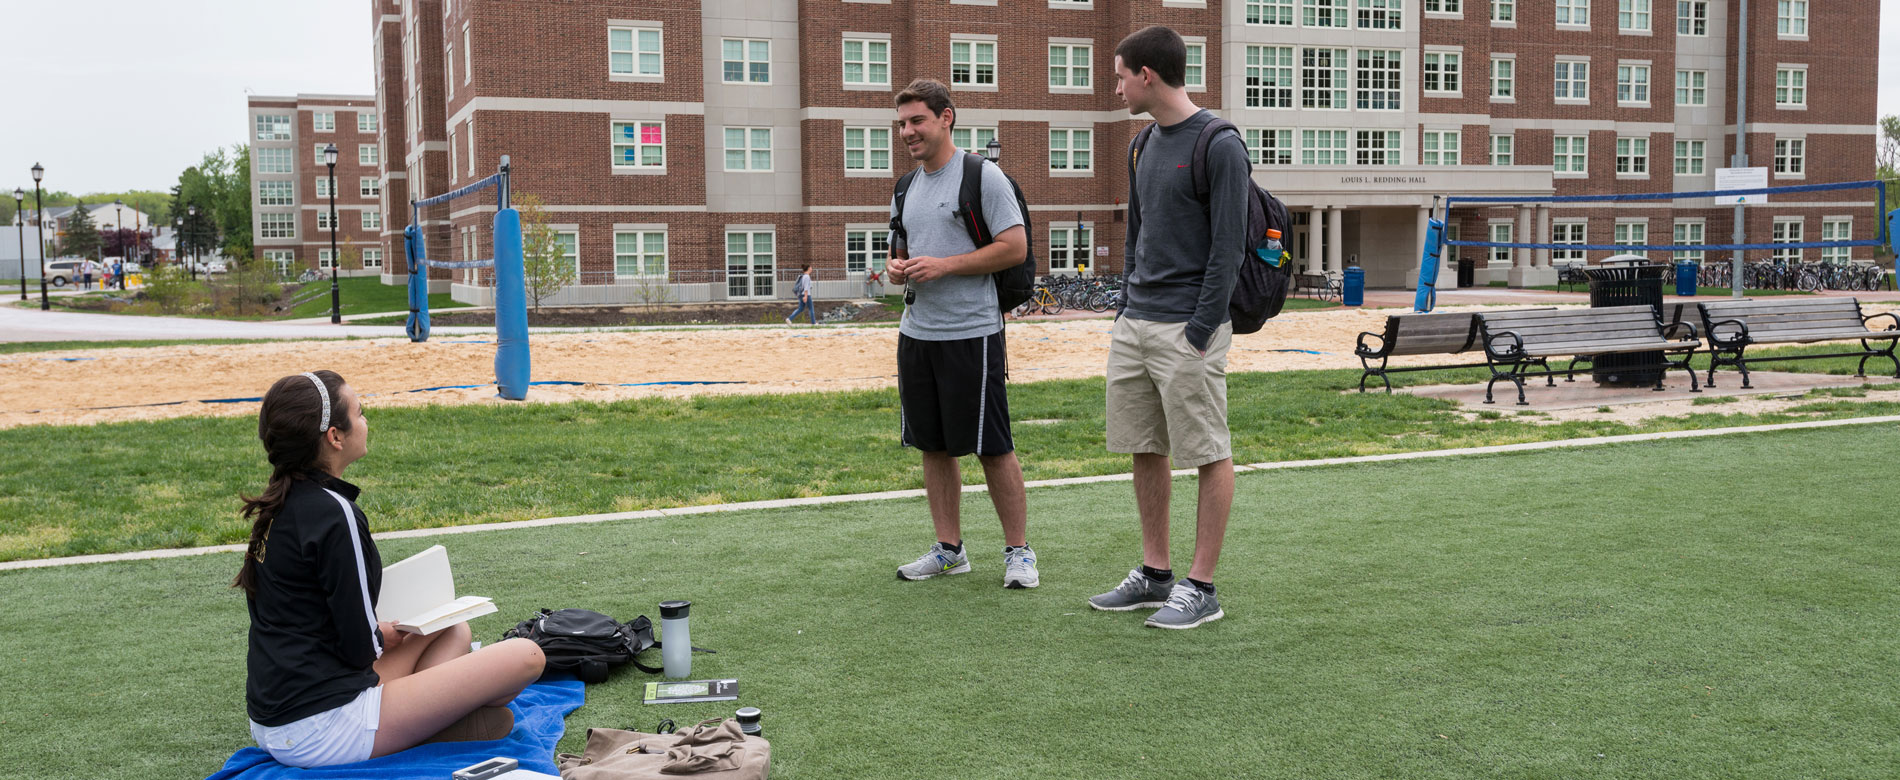 Students stand on the Turf talking; a volleyball court in the background